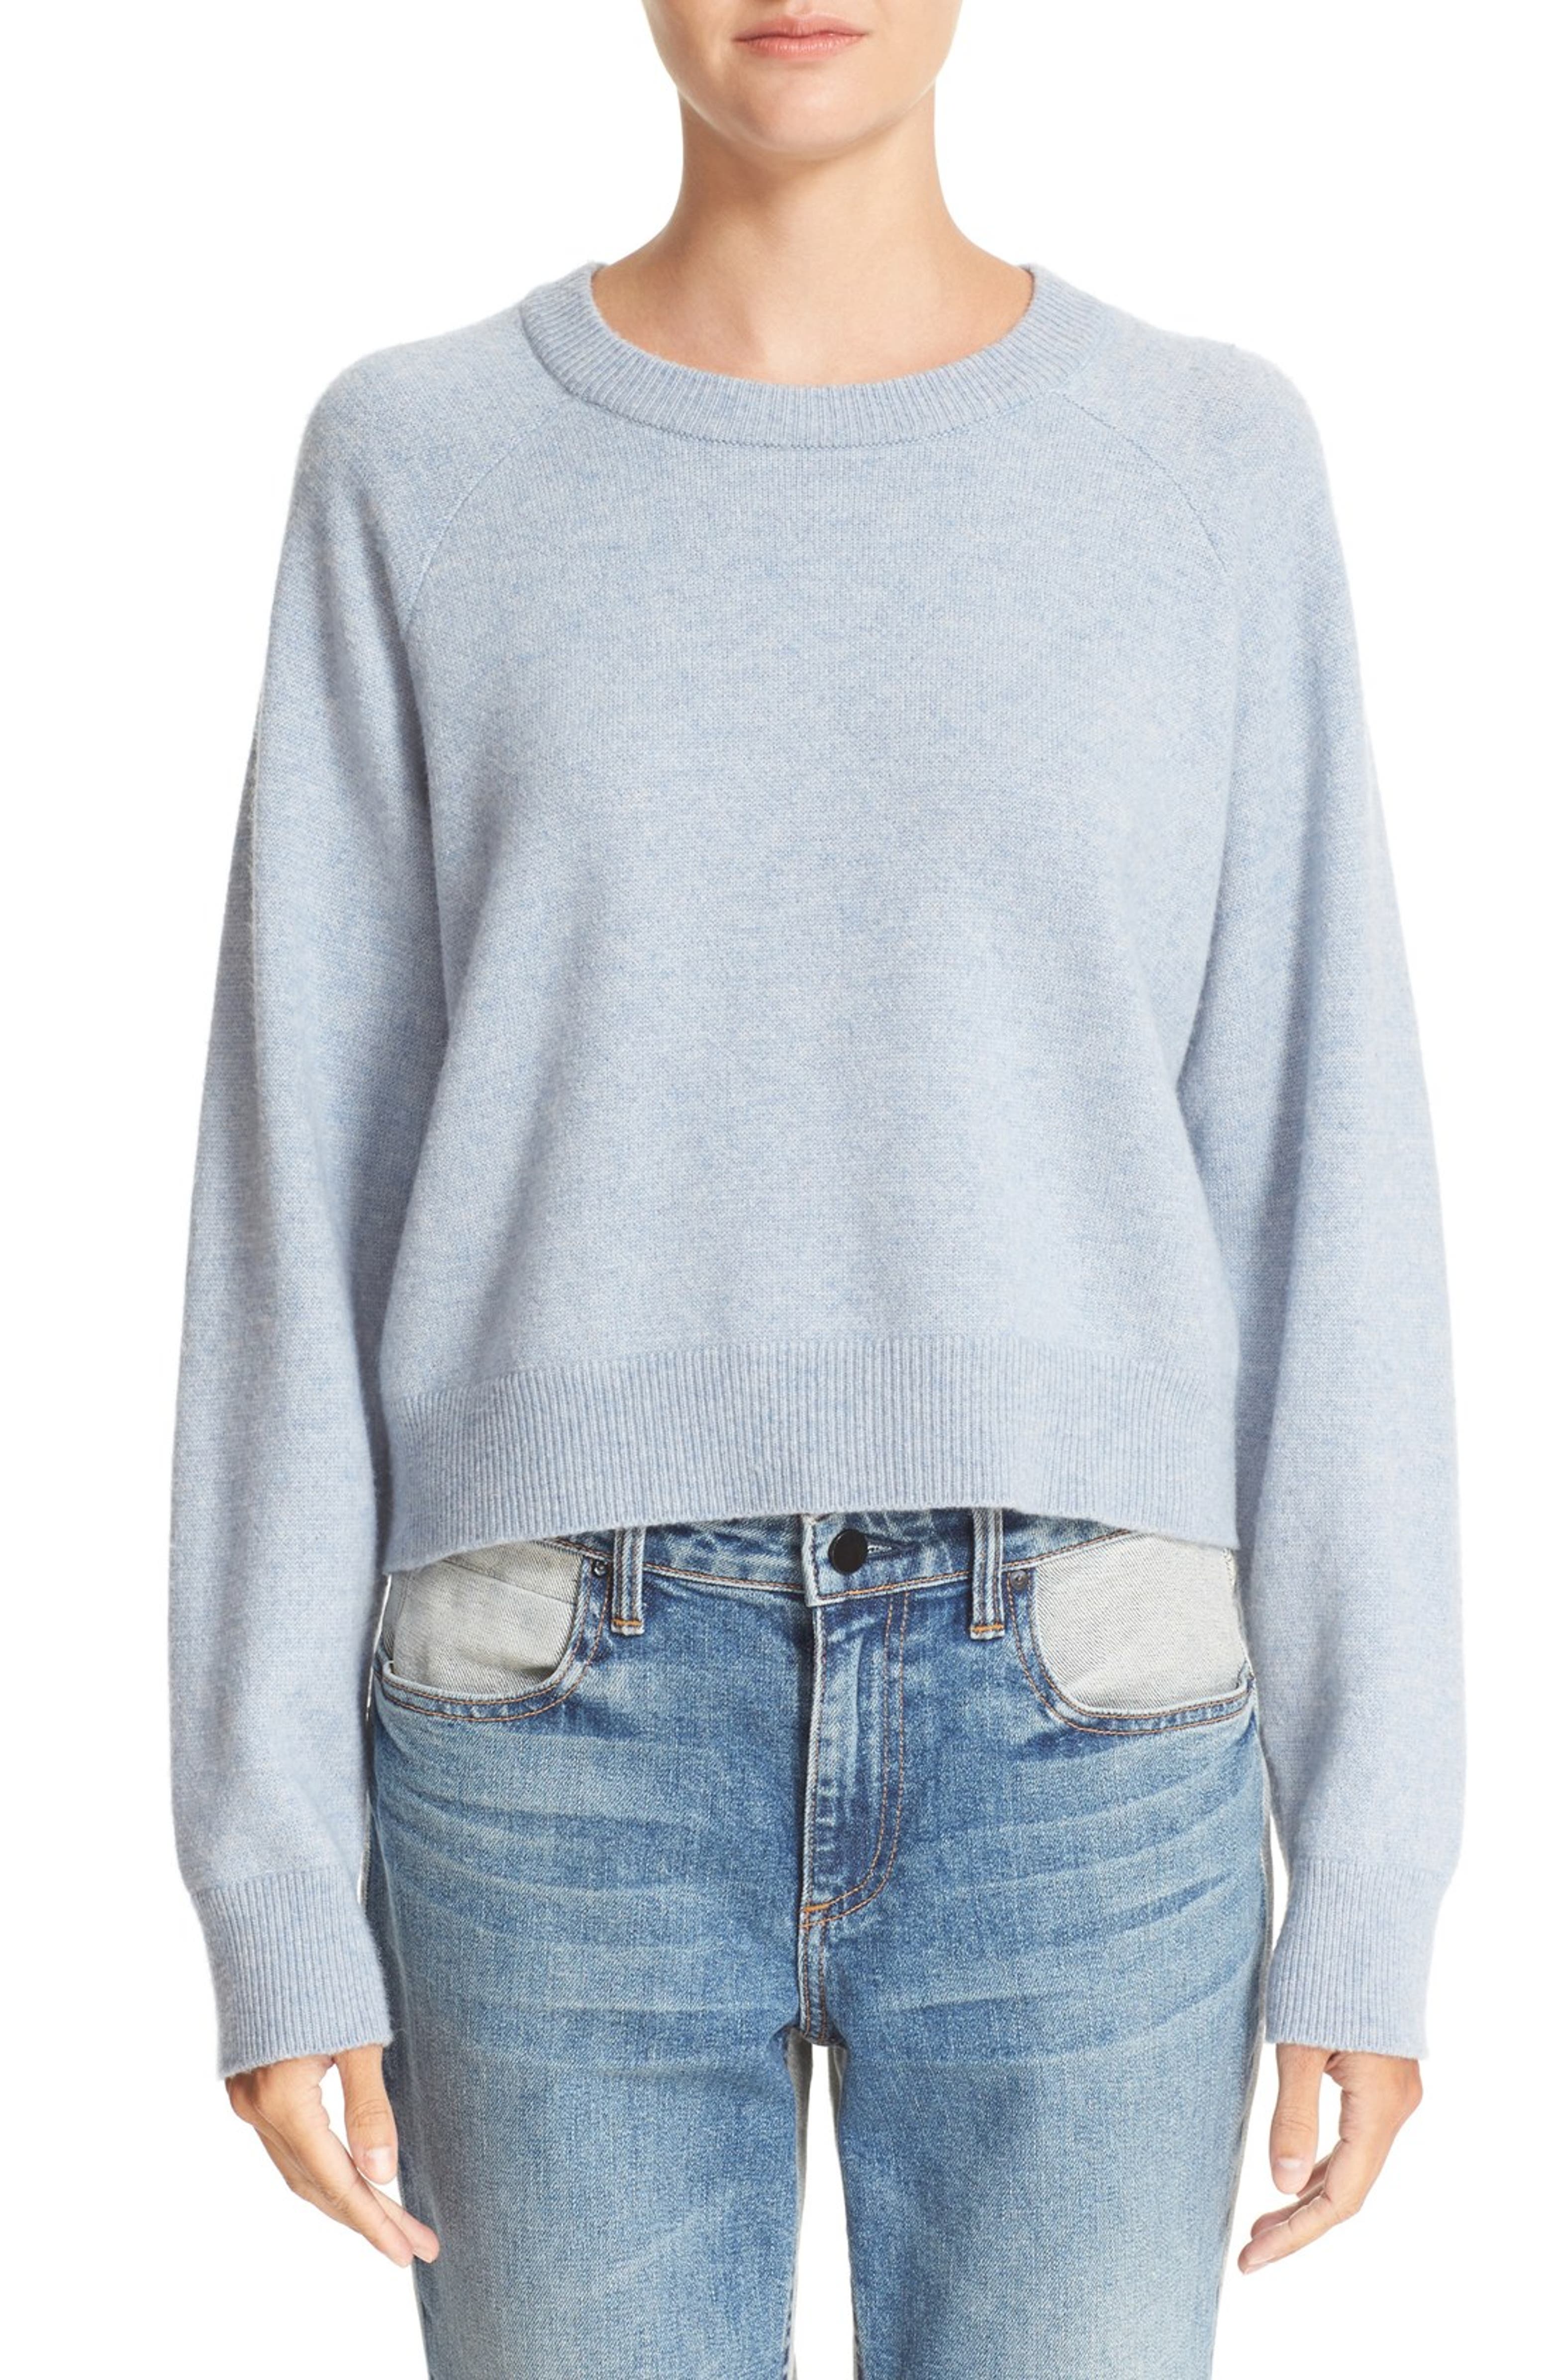 T by Alexander Wang Wool & Cashmere Birdseye Pullover | Nordstrom